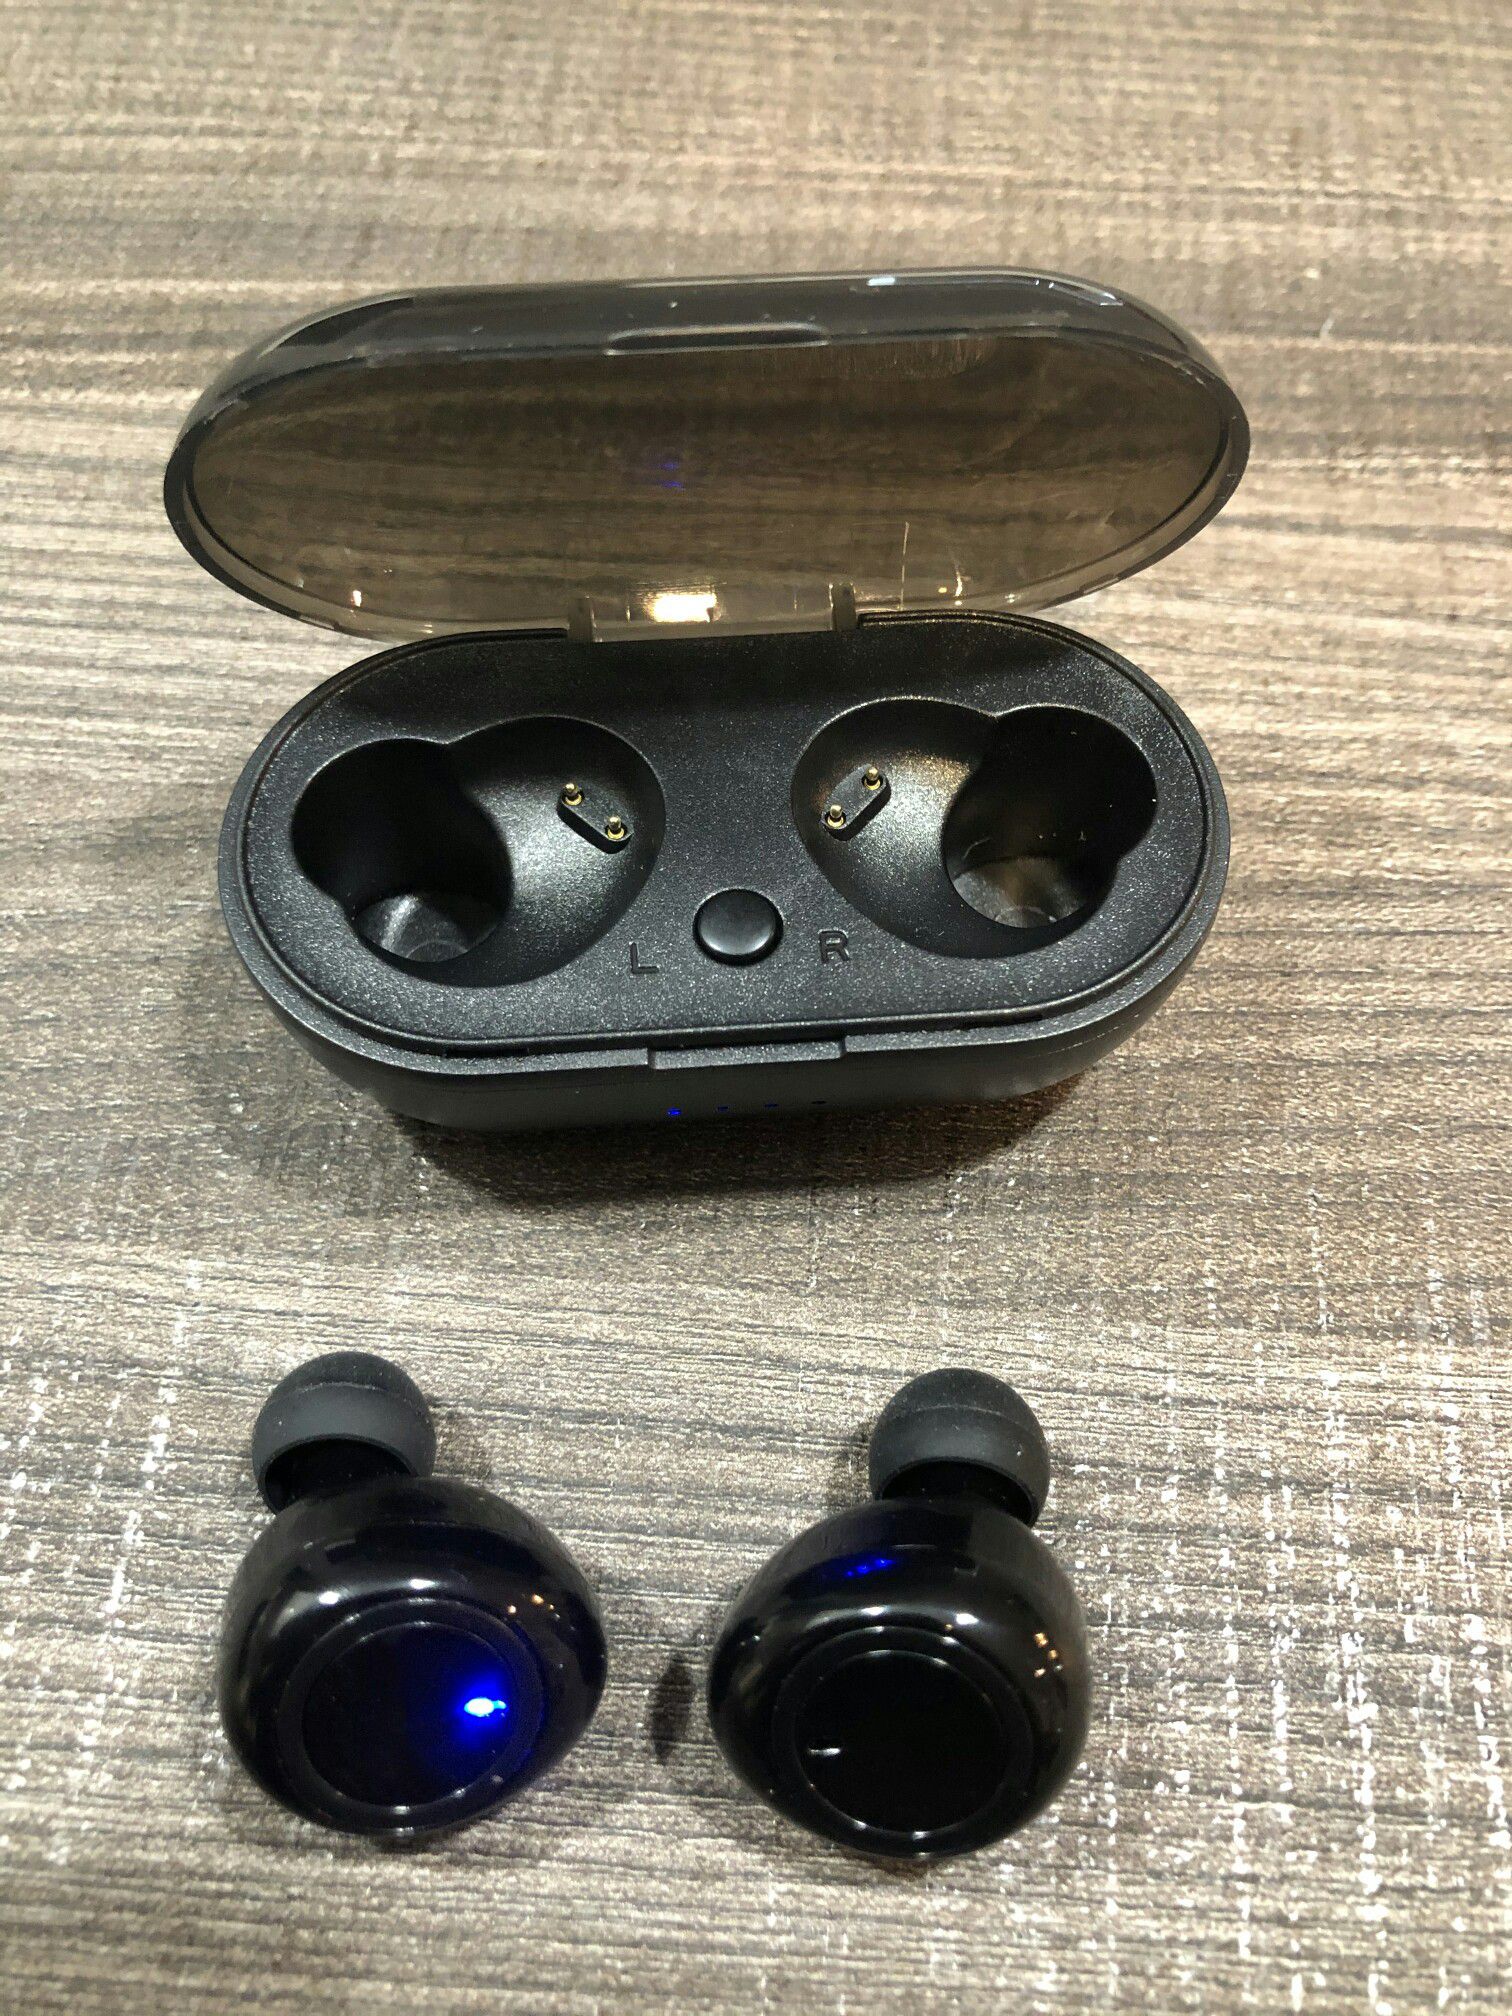 Brand new Bluetooth wireless in ear earphones earbuds with portable charging case built in microphone hands free calls